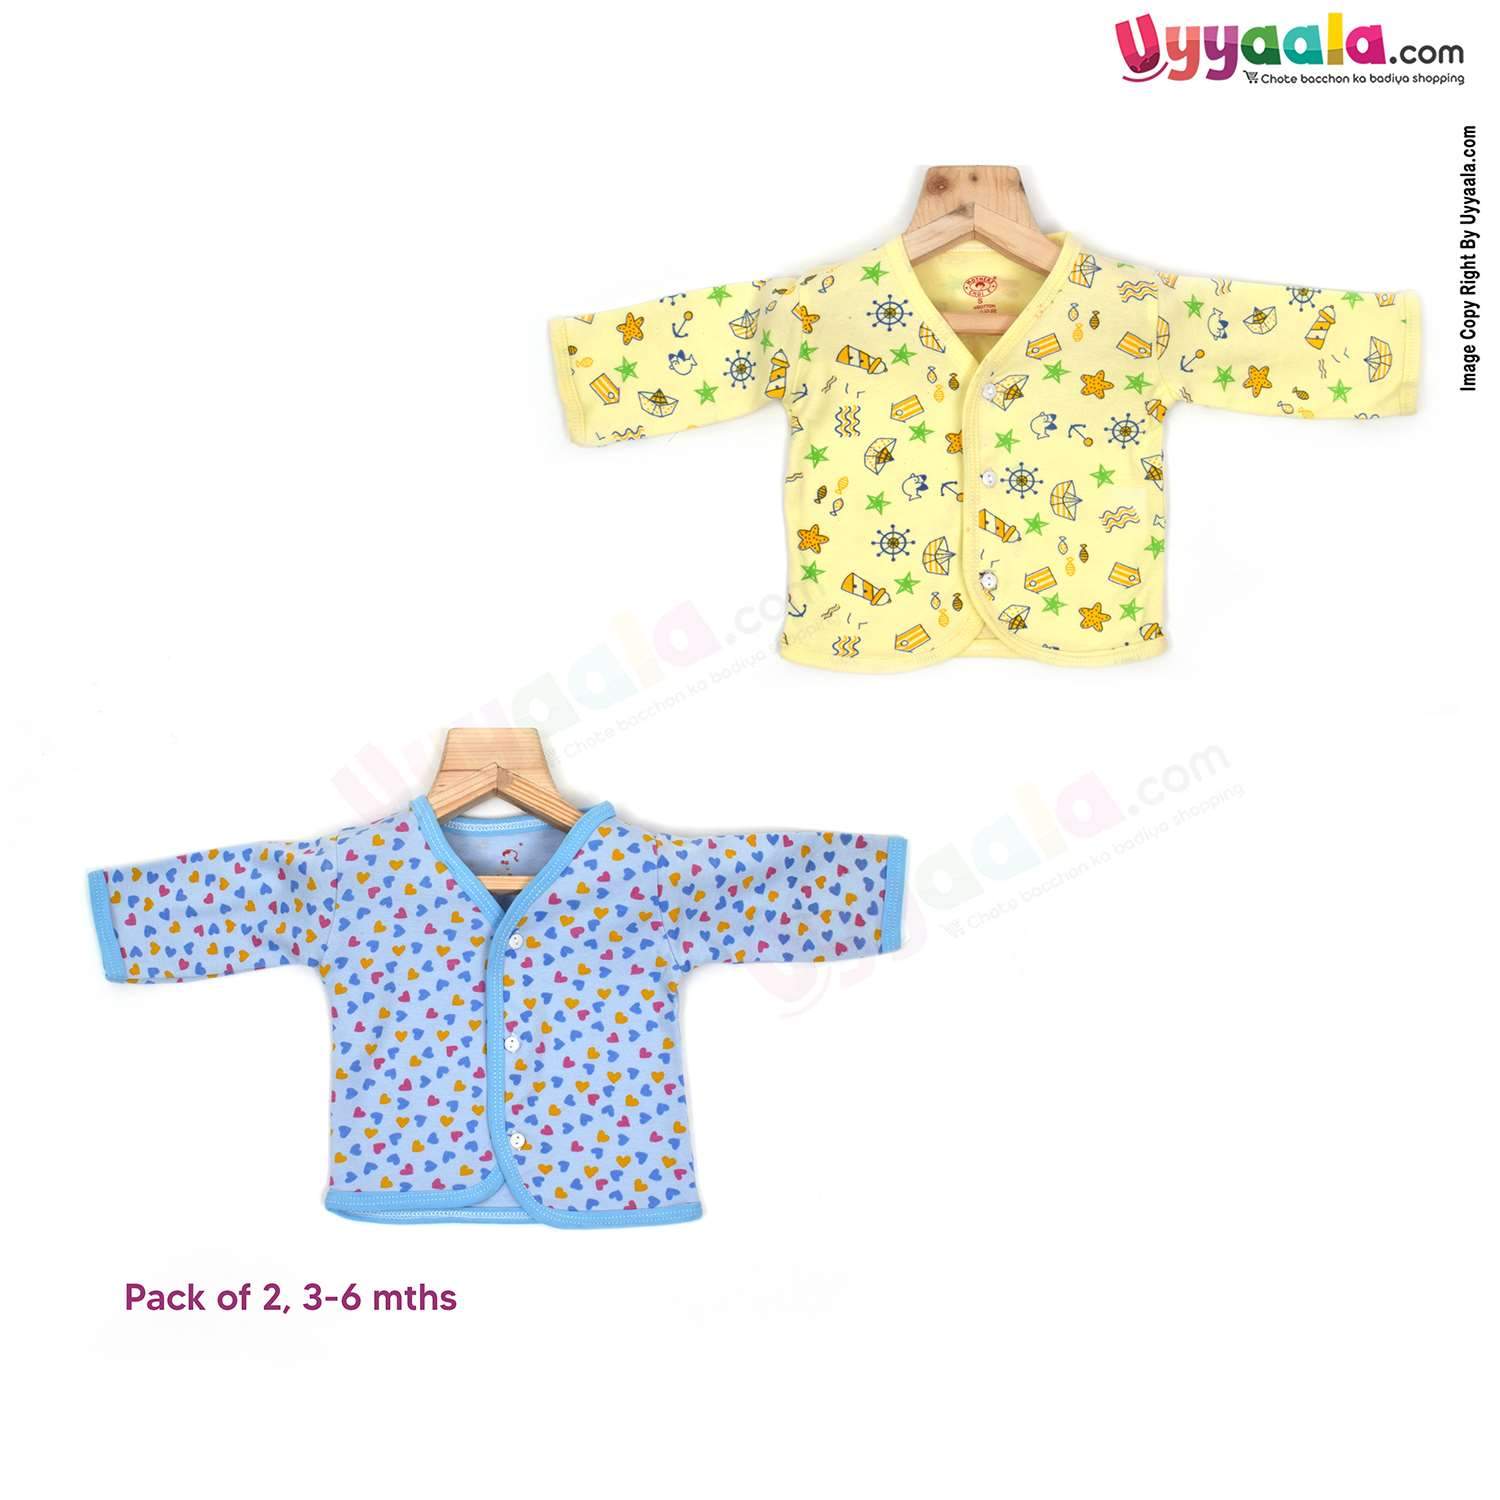 Mothers choice full sleeves front open jablas, 100% hosiery cotton, Pack of 2 (3-6M) - yellow & blue with assorted print